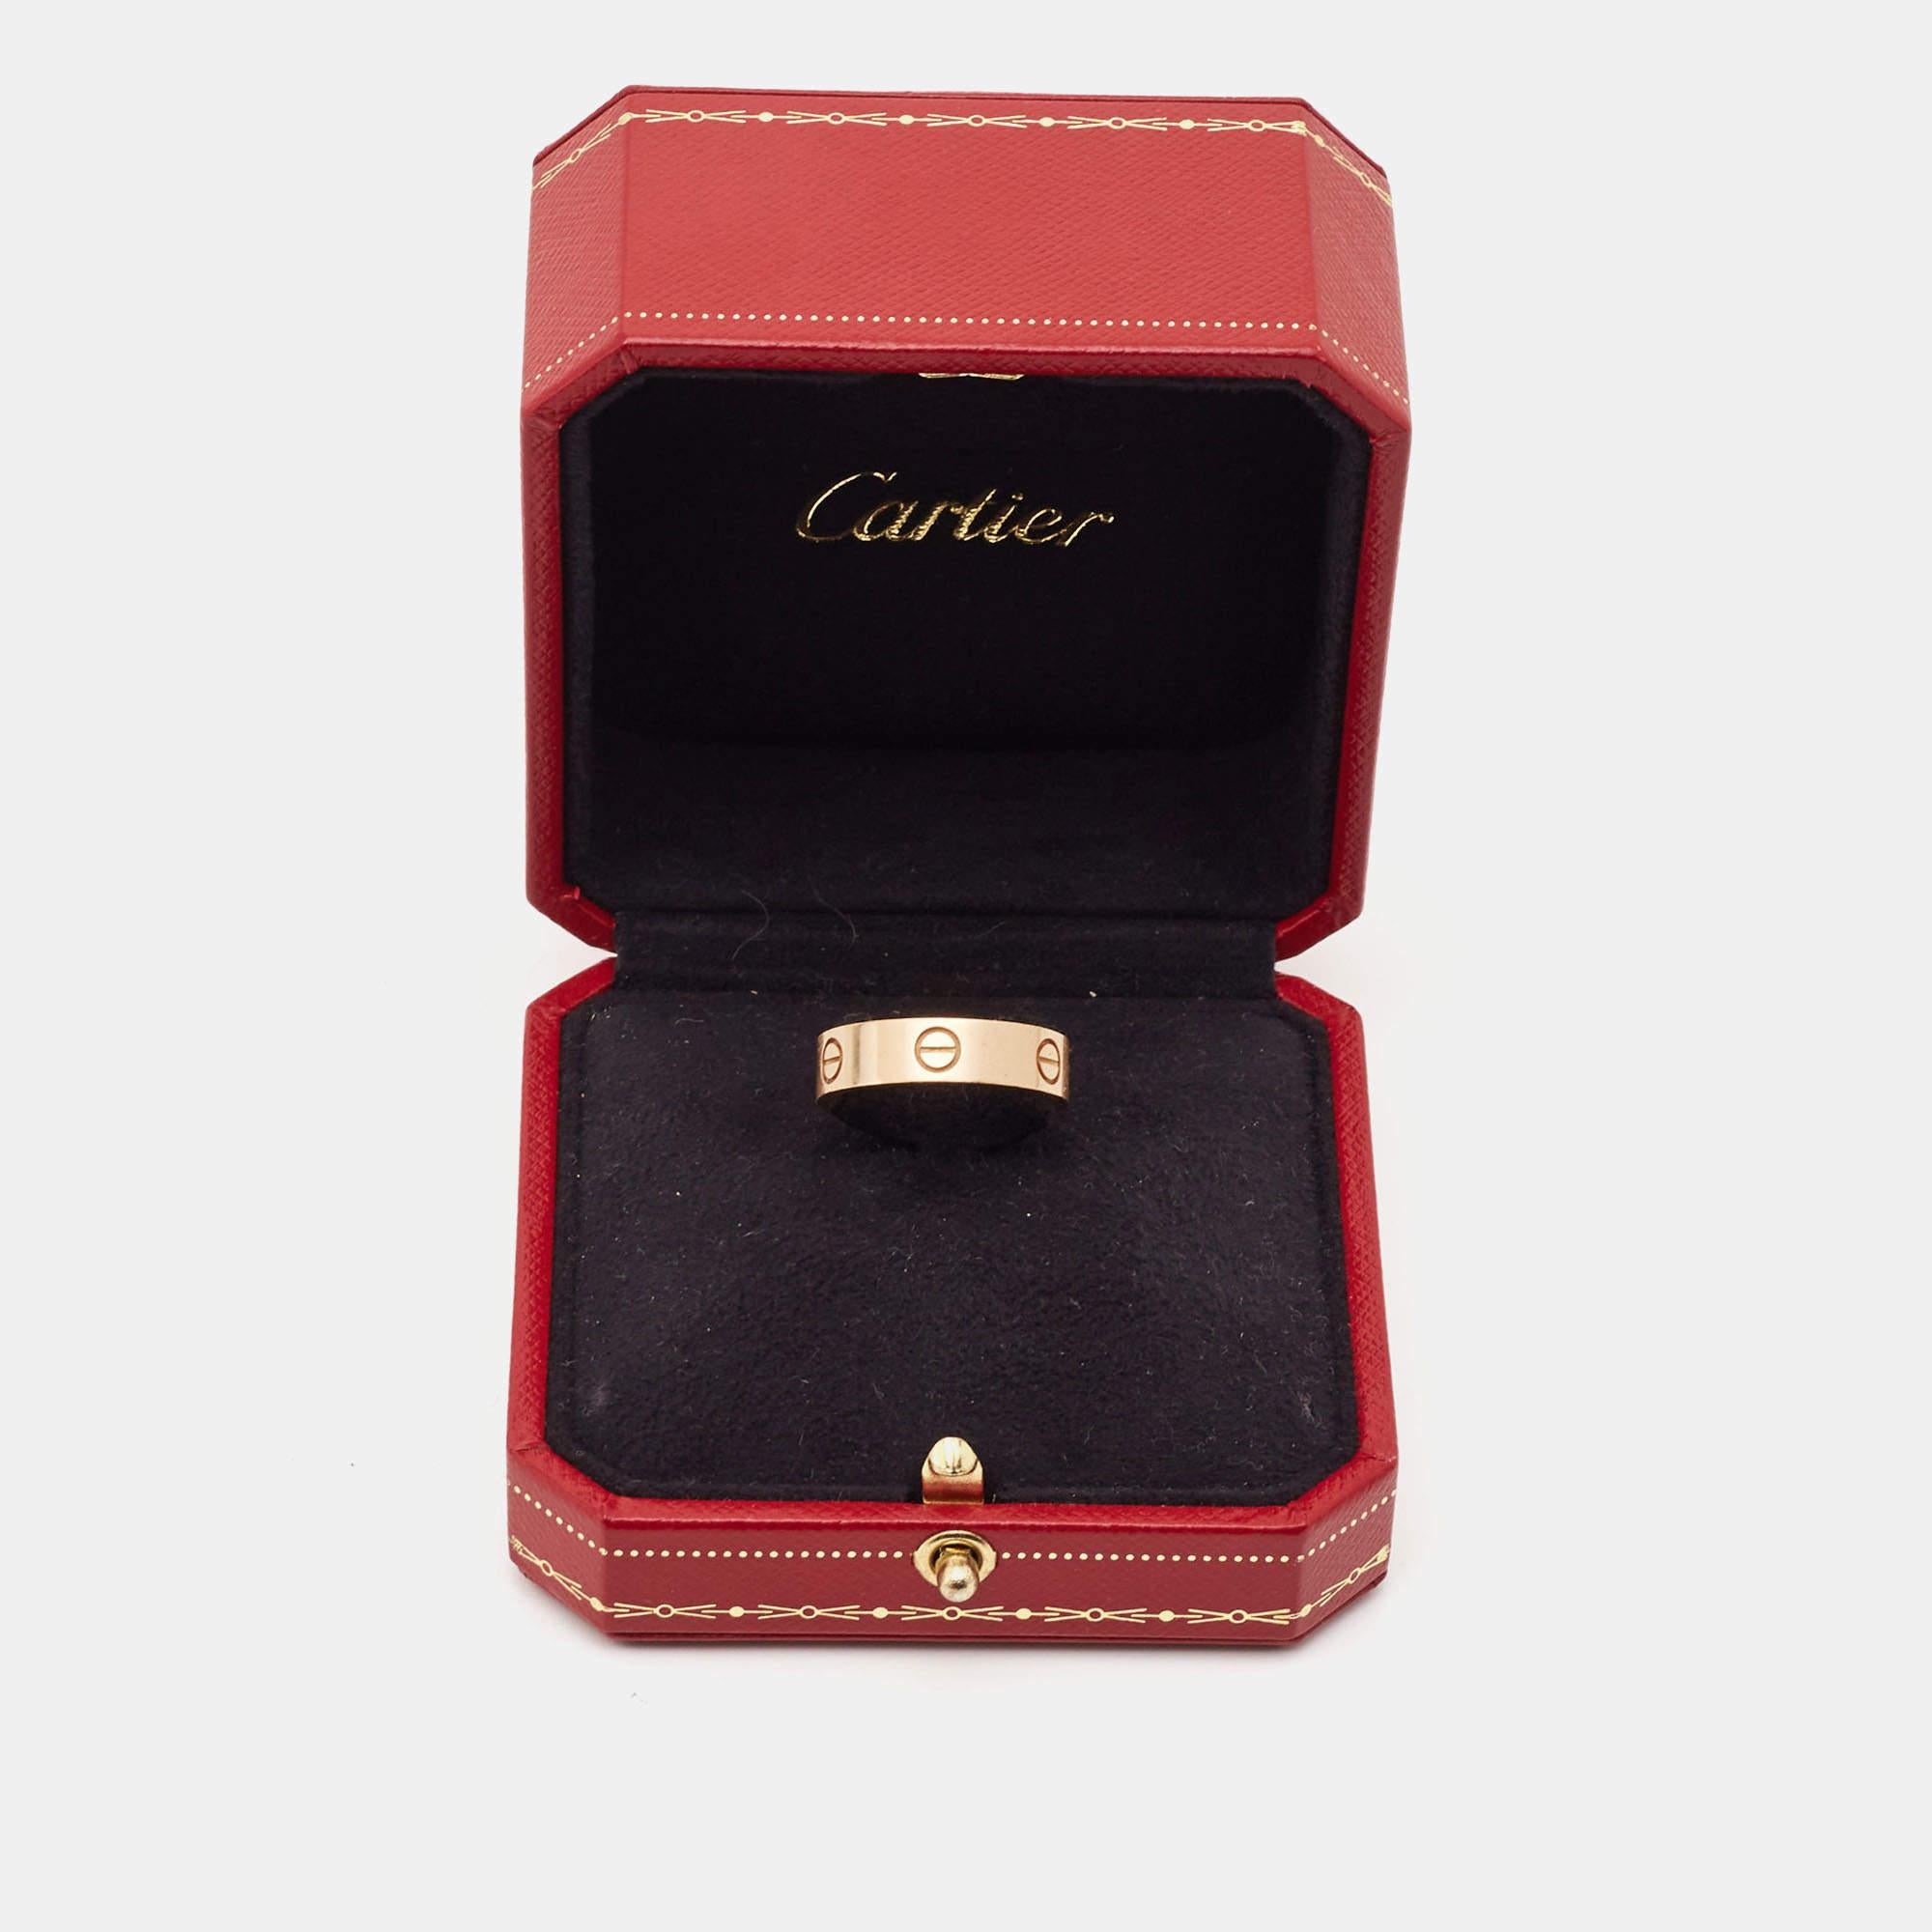 Cartier Love 18k Rose Gold Ring Size 59 For Sale 4